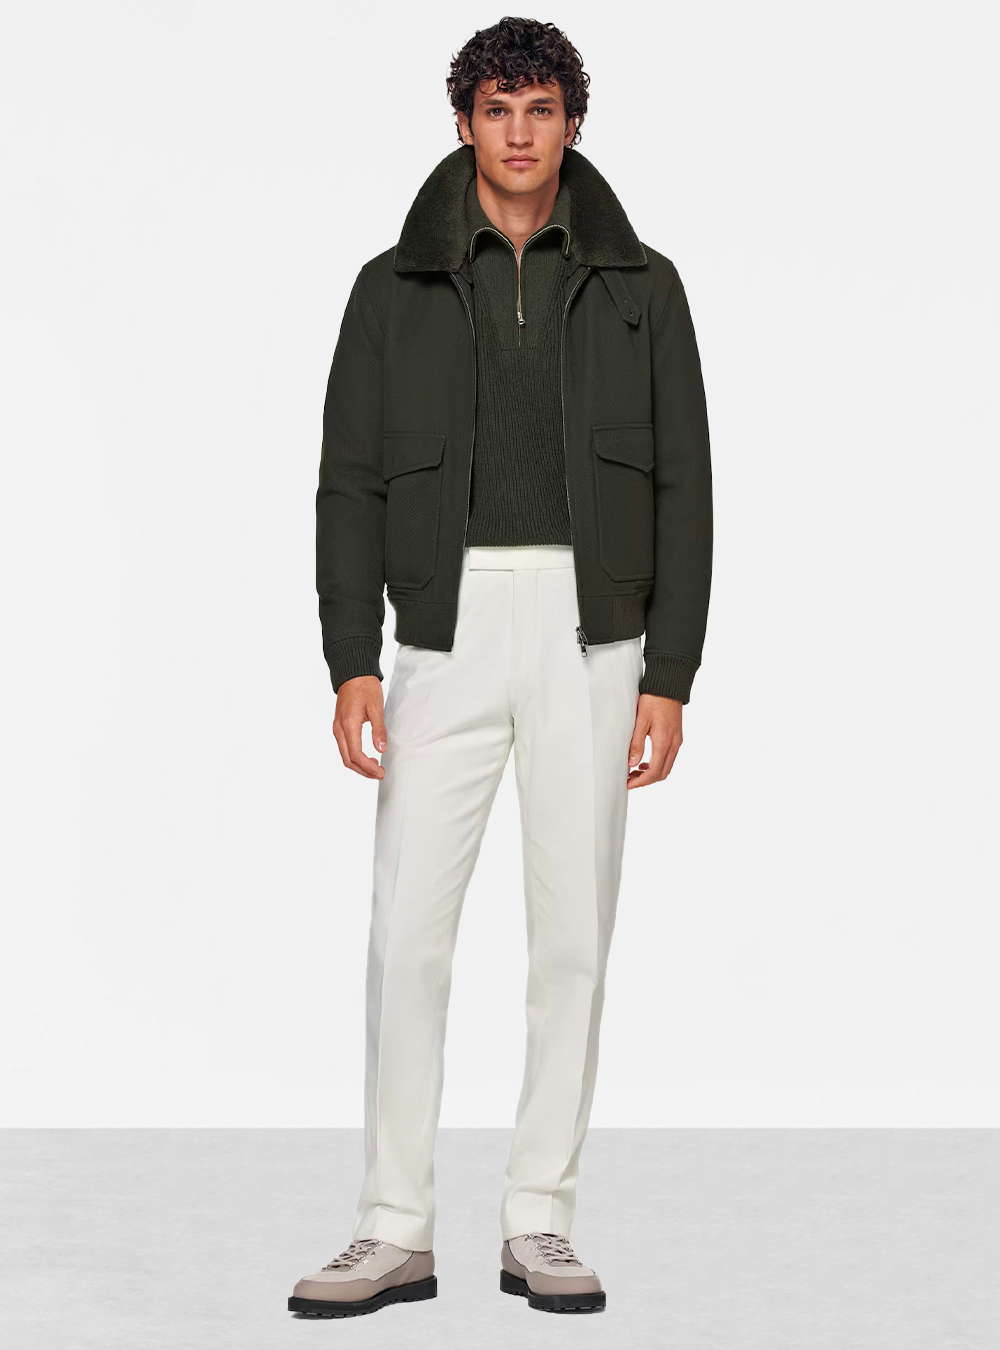 dark green bomber jacket with a half-zip sweater and off-white trousers